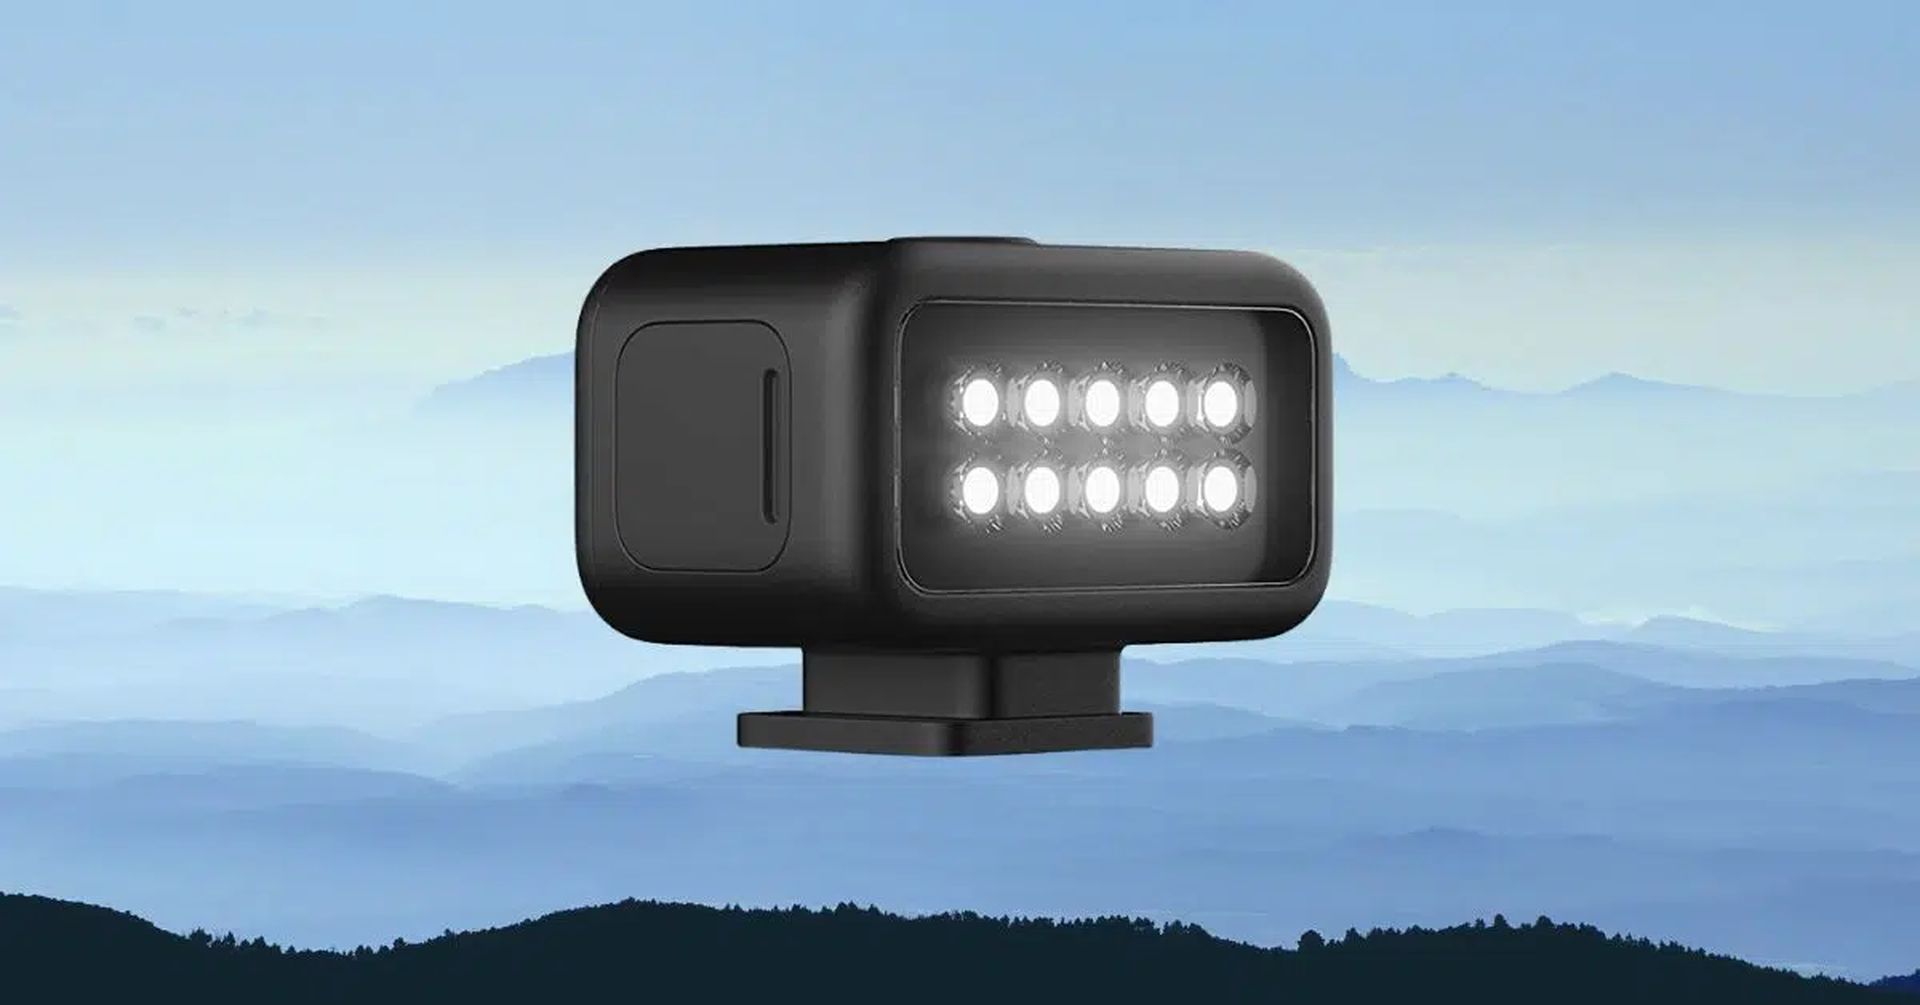 If you capture videos of your adventures with an action camera but struggle with low light, our best action camera flashlights (2022) is just the thing for you.